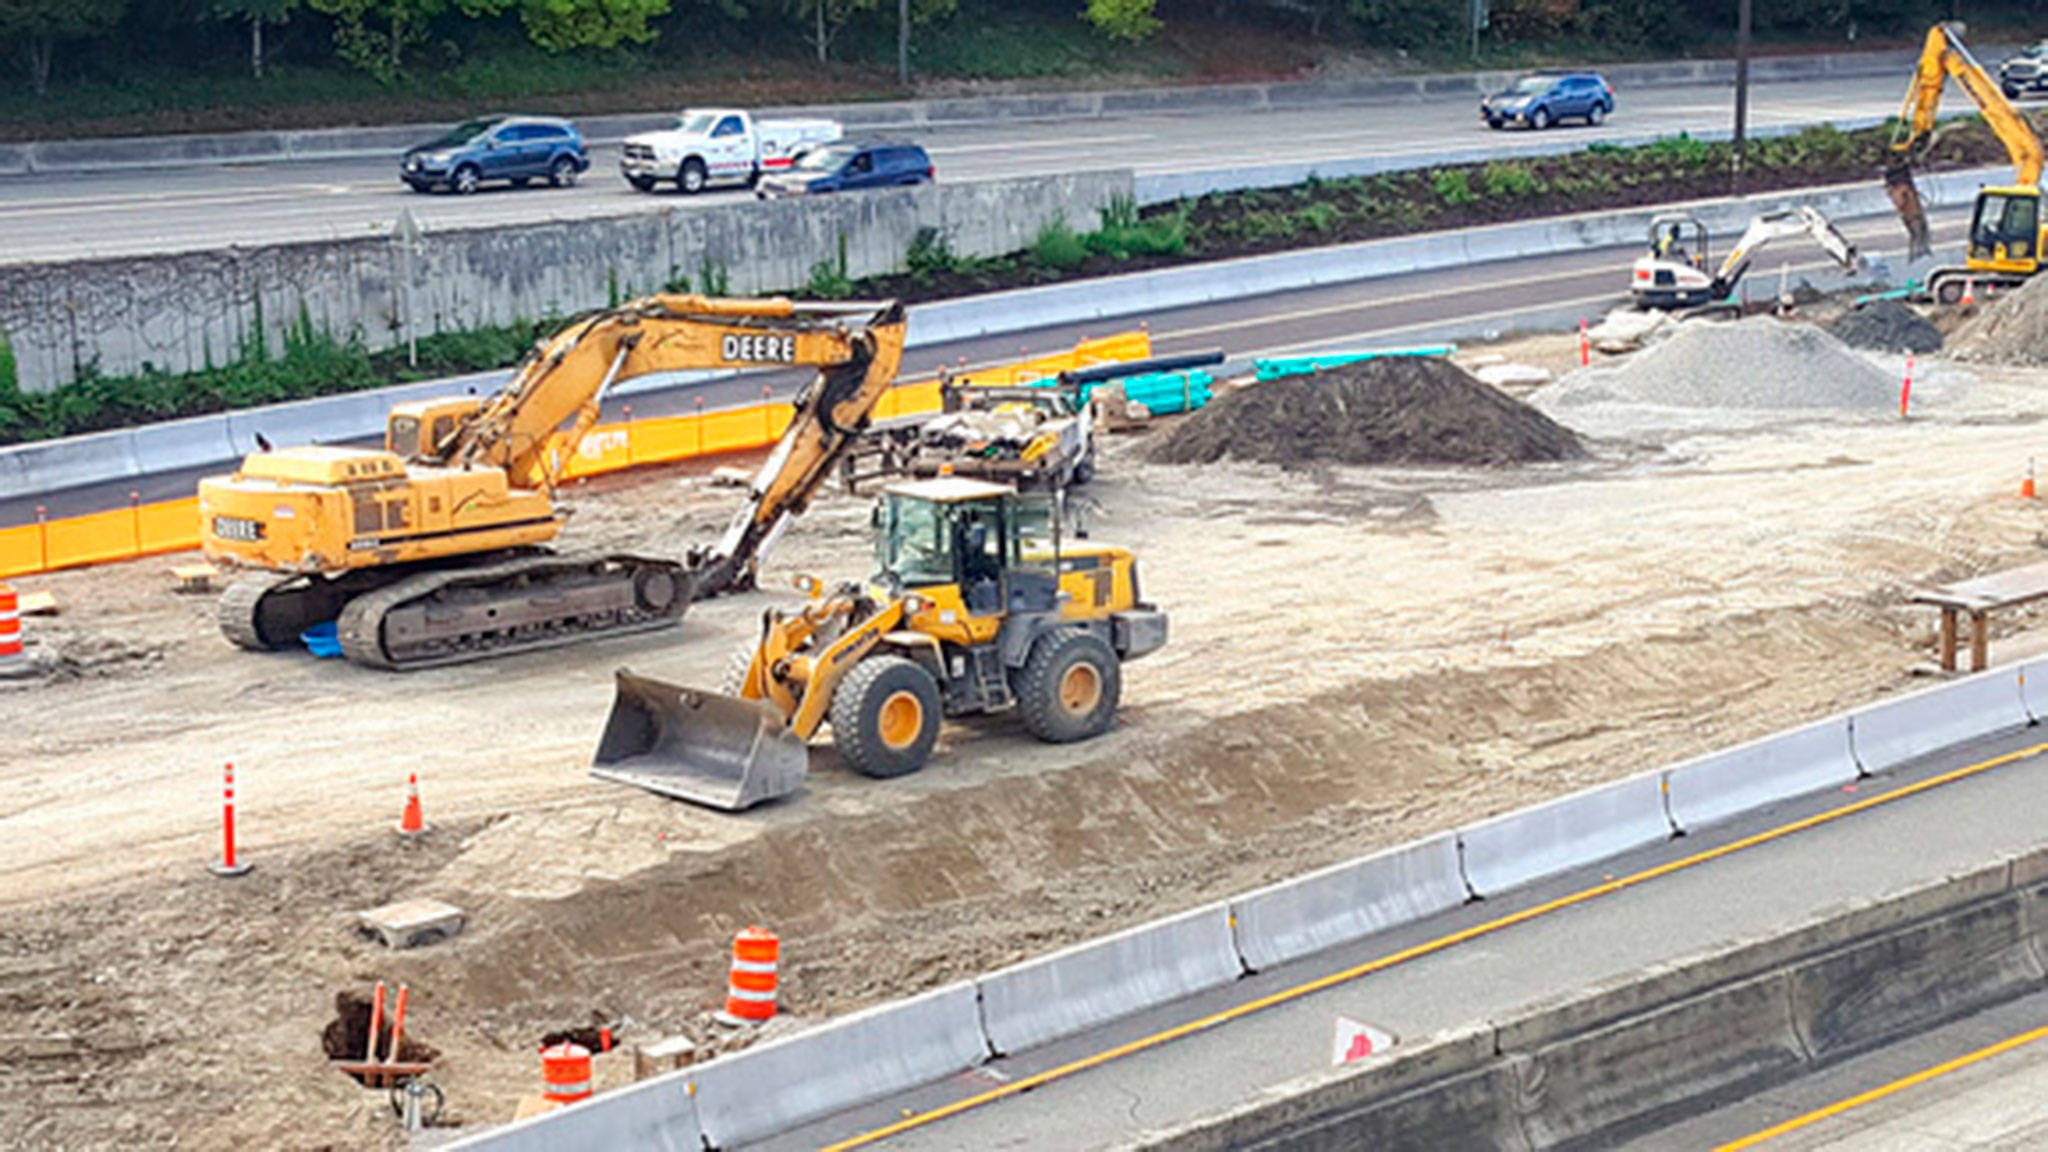 Crews excavate the station area to prepare for utility protection installation. Photo courtesy of Sound Transit